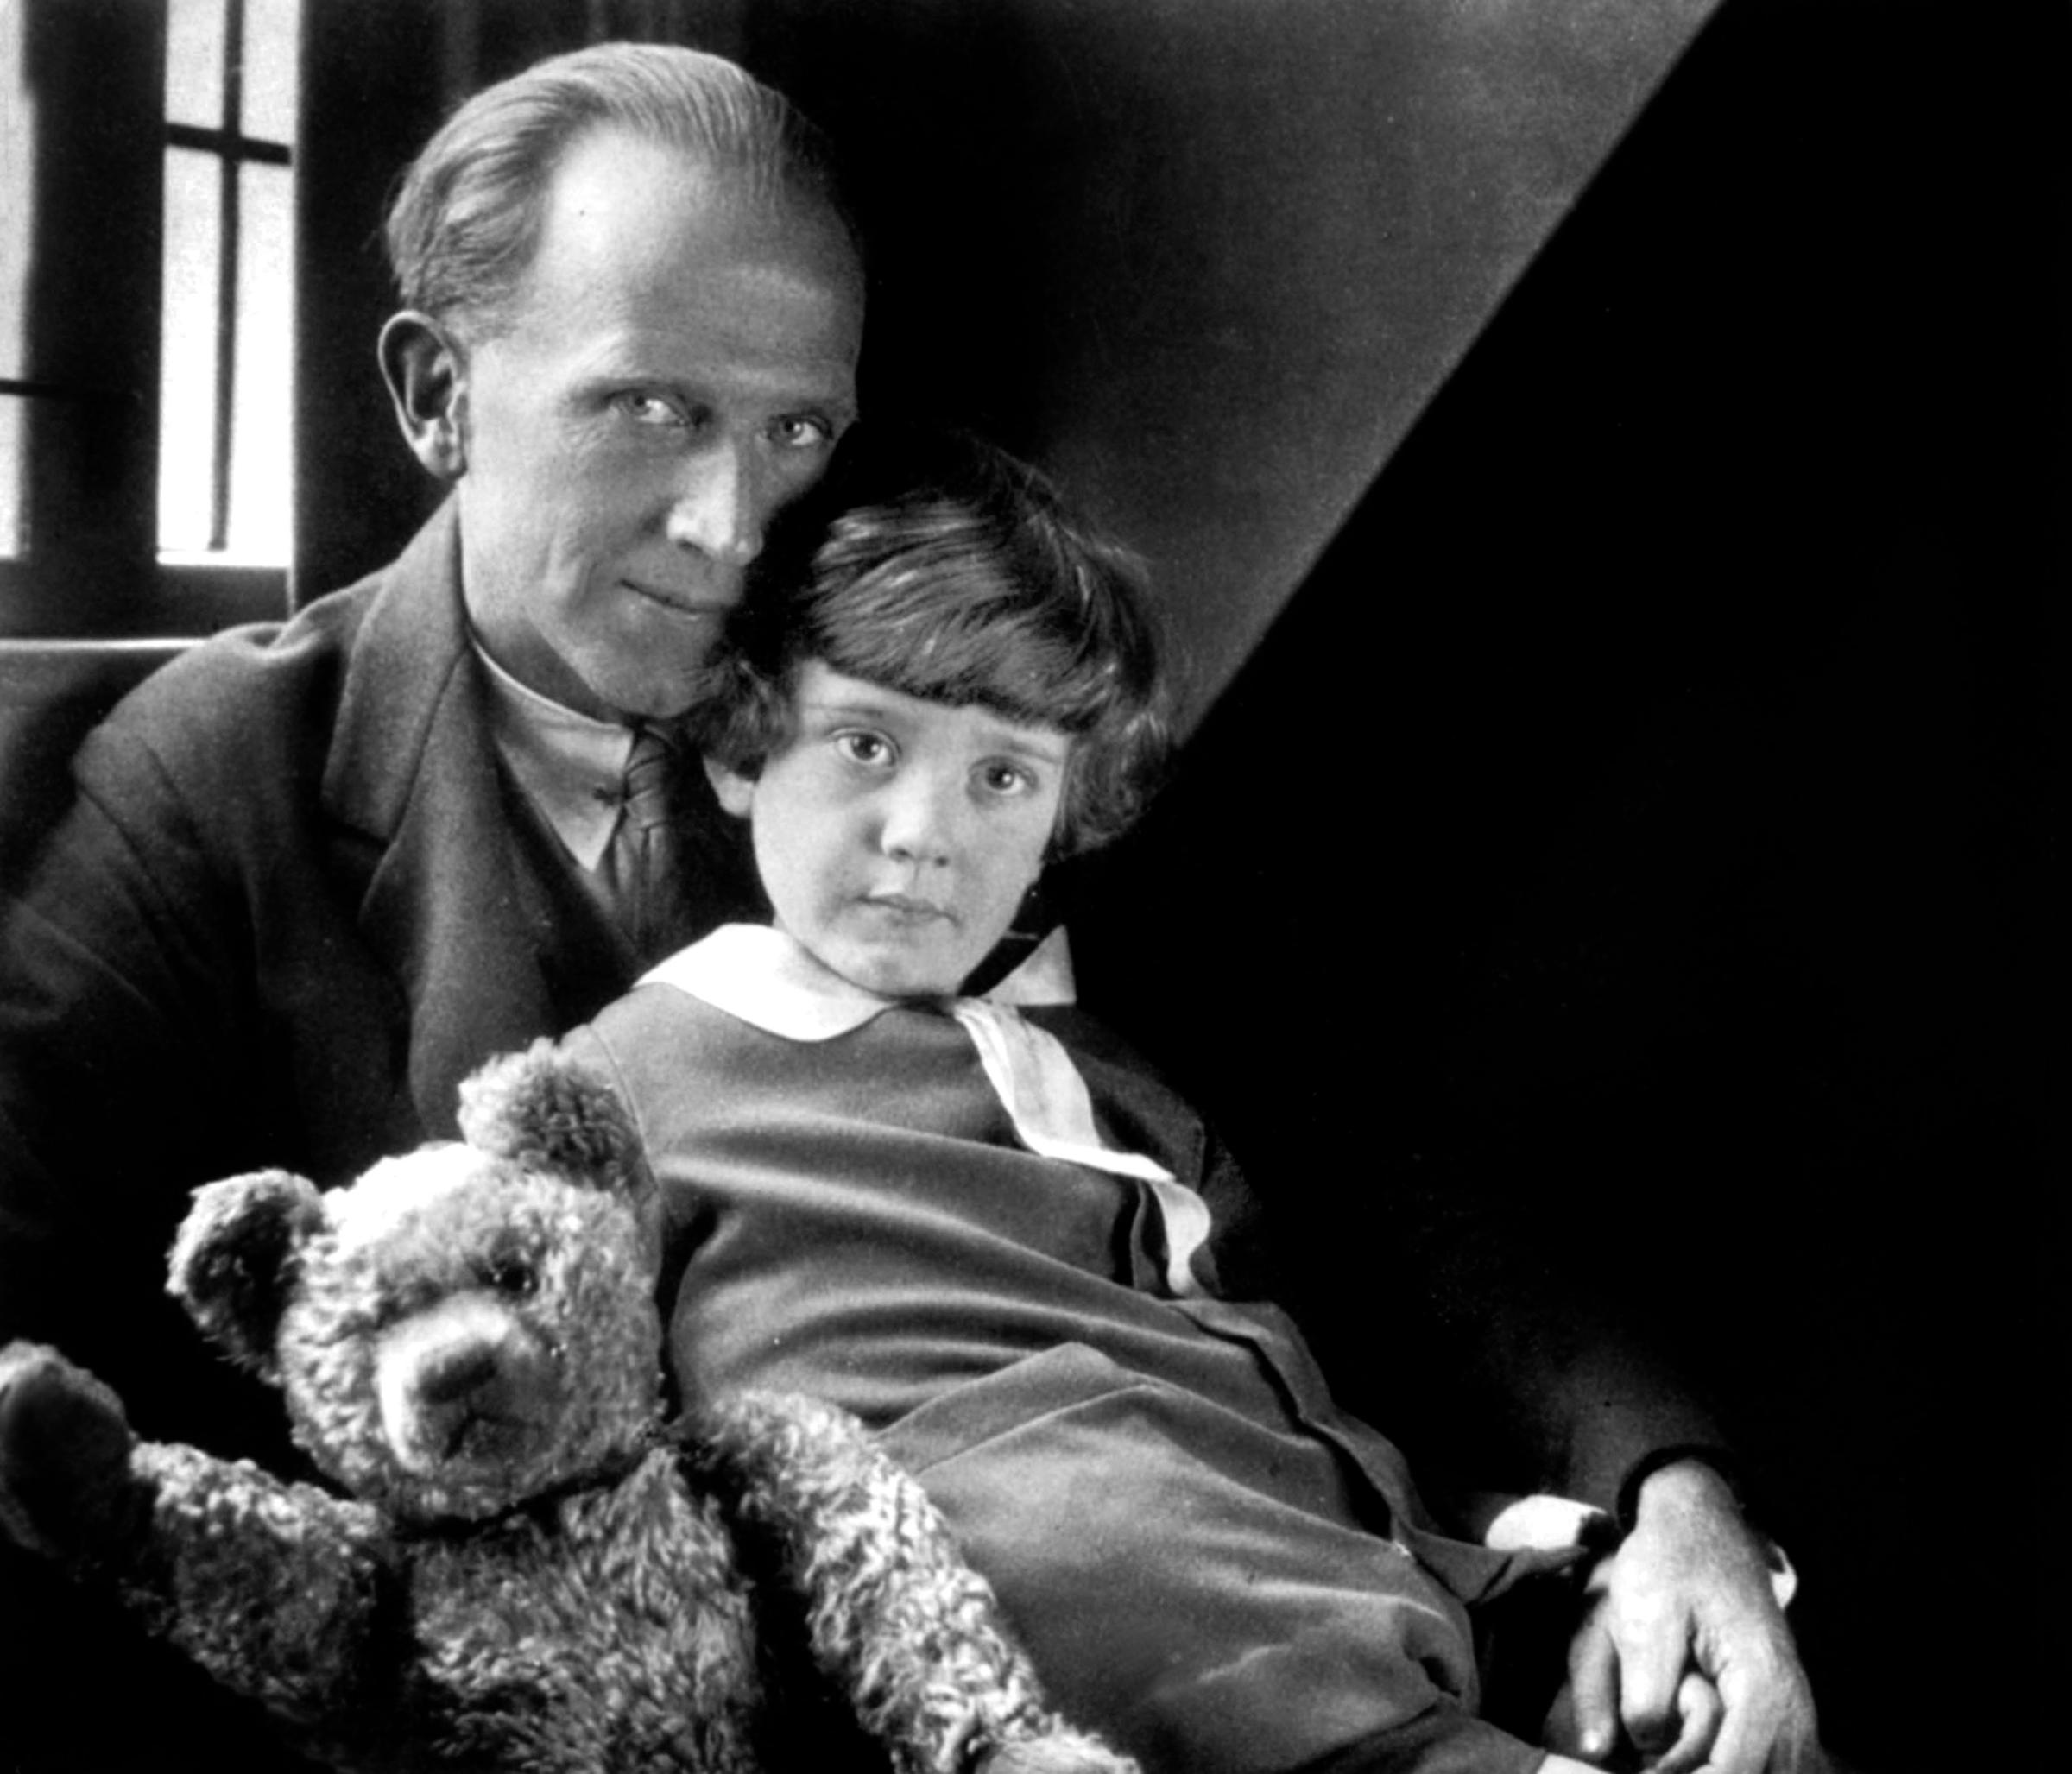 The English novelist Alan Alexander Milne (1882-1956) author of the story Winnie the Pooh, here with his son Christopher Robin Milner (1920-1996), photo by Howard Coster, 1926 - English novelist Alan Alexander Milne who wrote the story of Winnie the Pooh